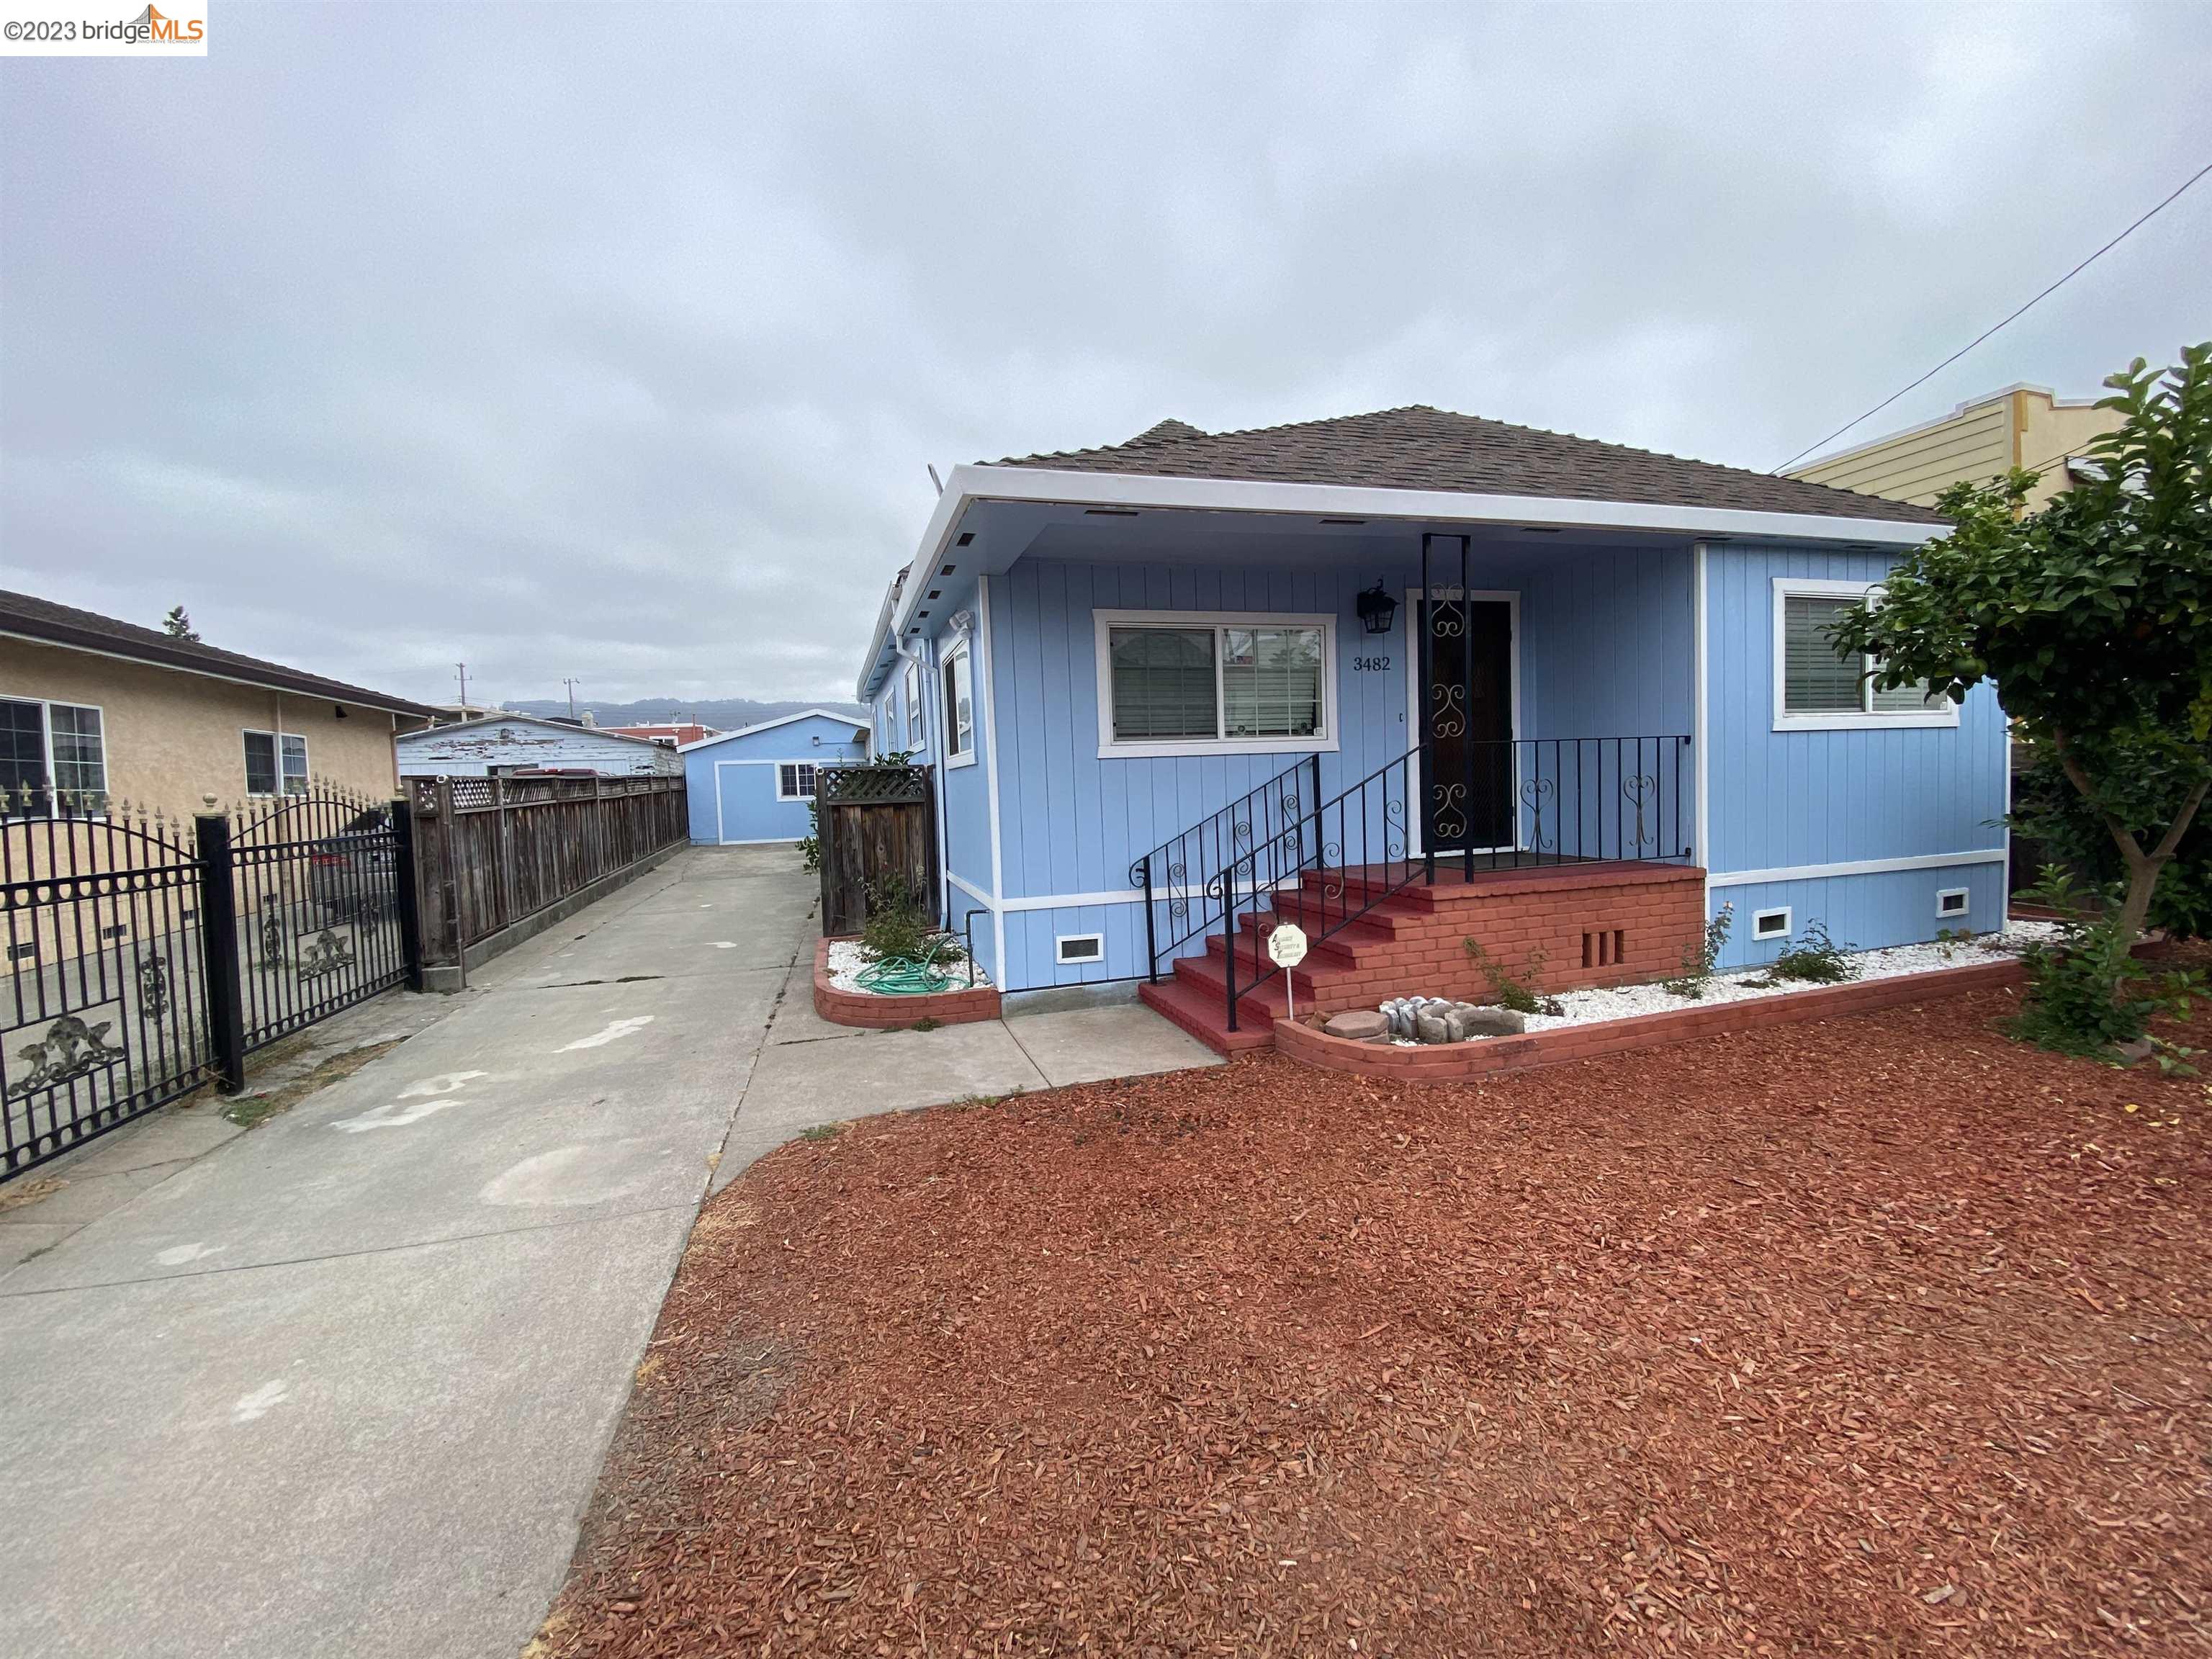 This Charming Bungalow offers 3Bedrooms / 2Bathrooms with the long Driveway  natural light to the house ,hardwood floors  and very spacious house  Easy access to FW 580 & FW 880   very convenient to School , Local Grocery store in Fruitvale area and many more ......  security Gate